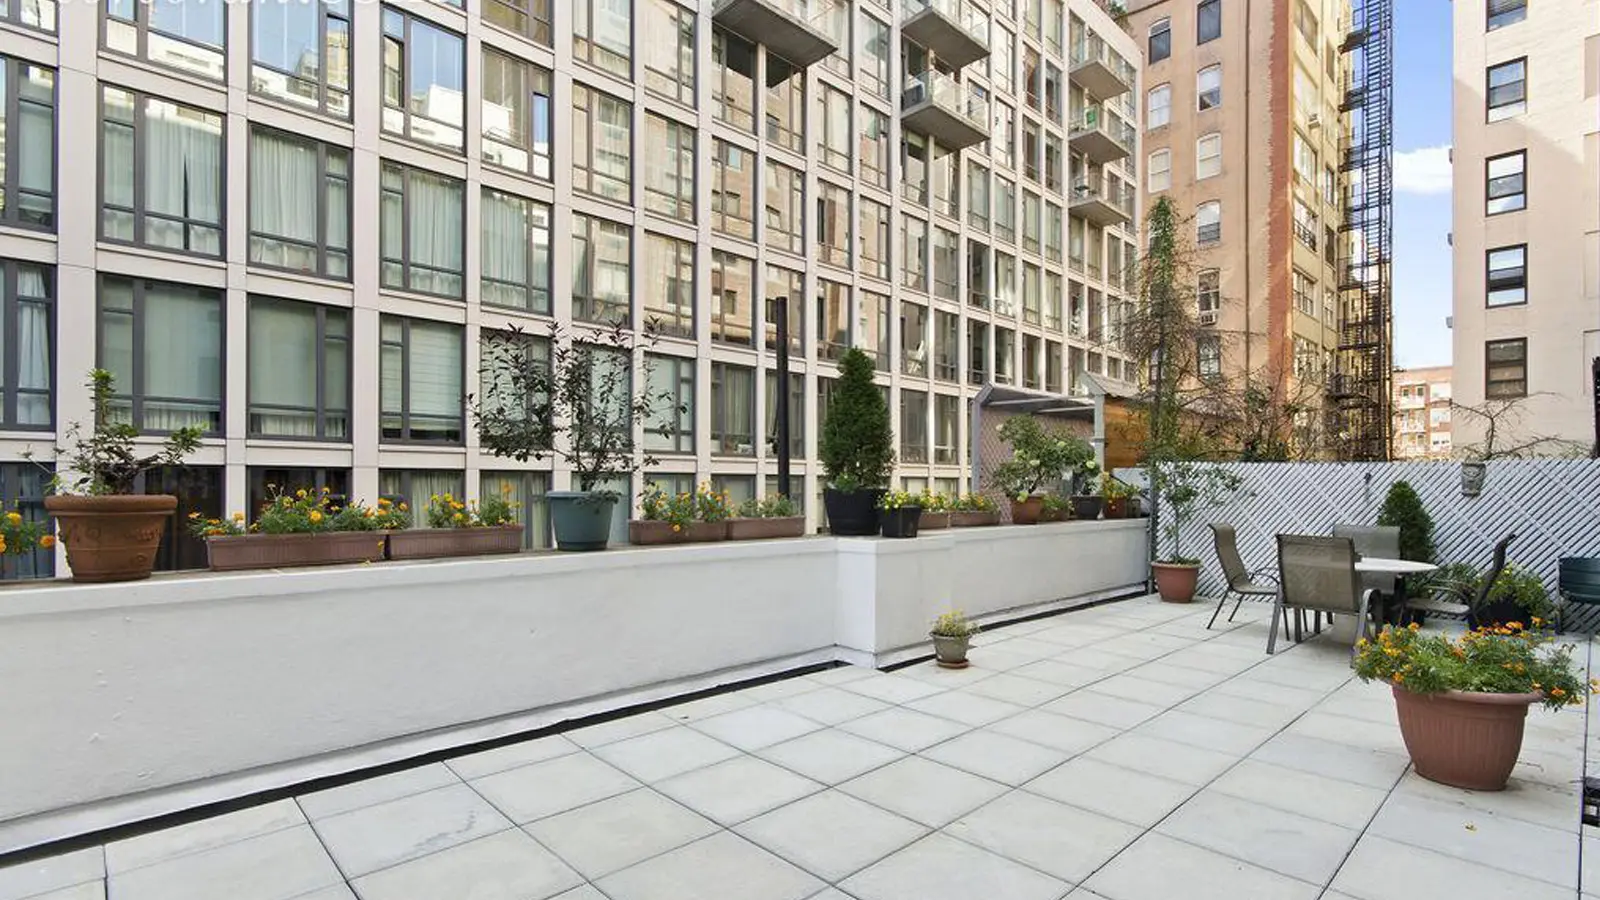 Claret Commons, 140 West 23rd Street